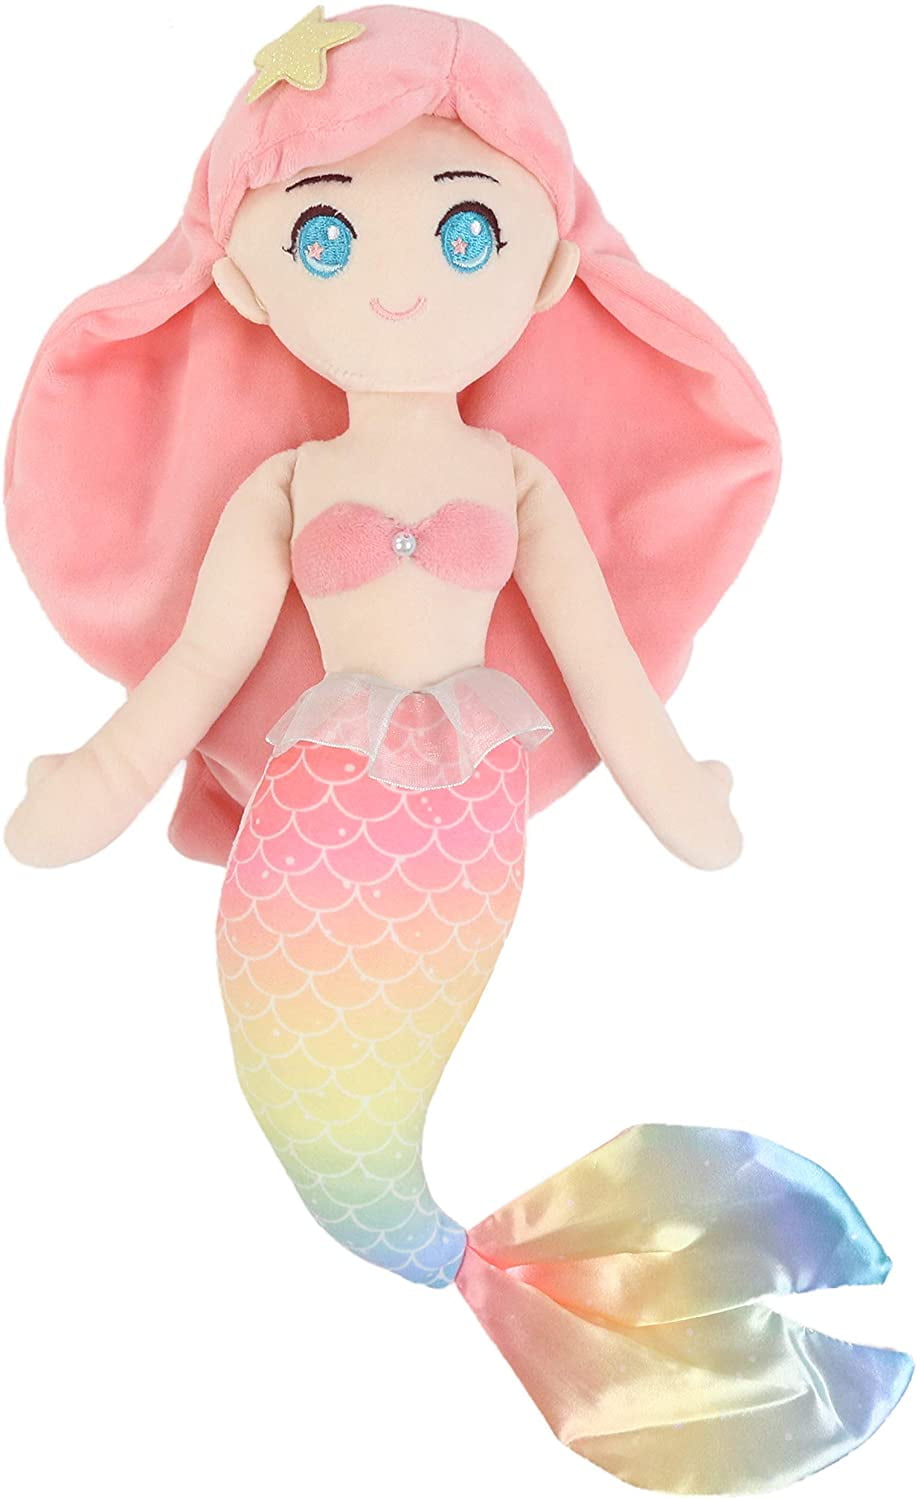 Toy Doll Birthday Gift Stuffed Animals Baby Girl Personalize Customize Plushie Mermaid Princess Doll Christmas Gift